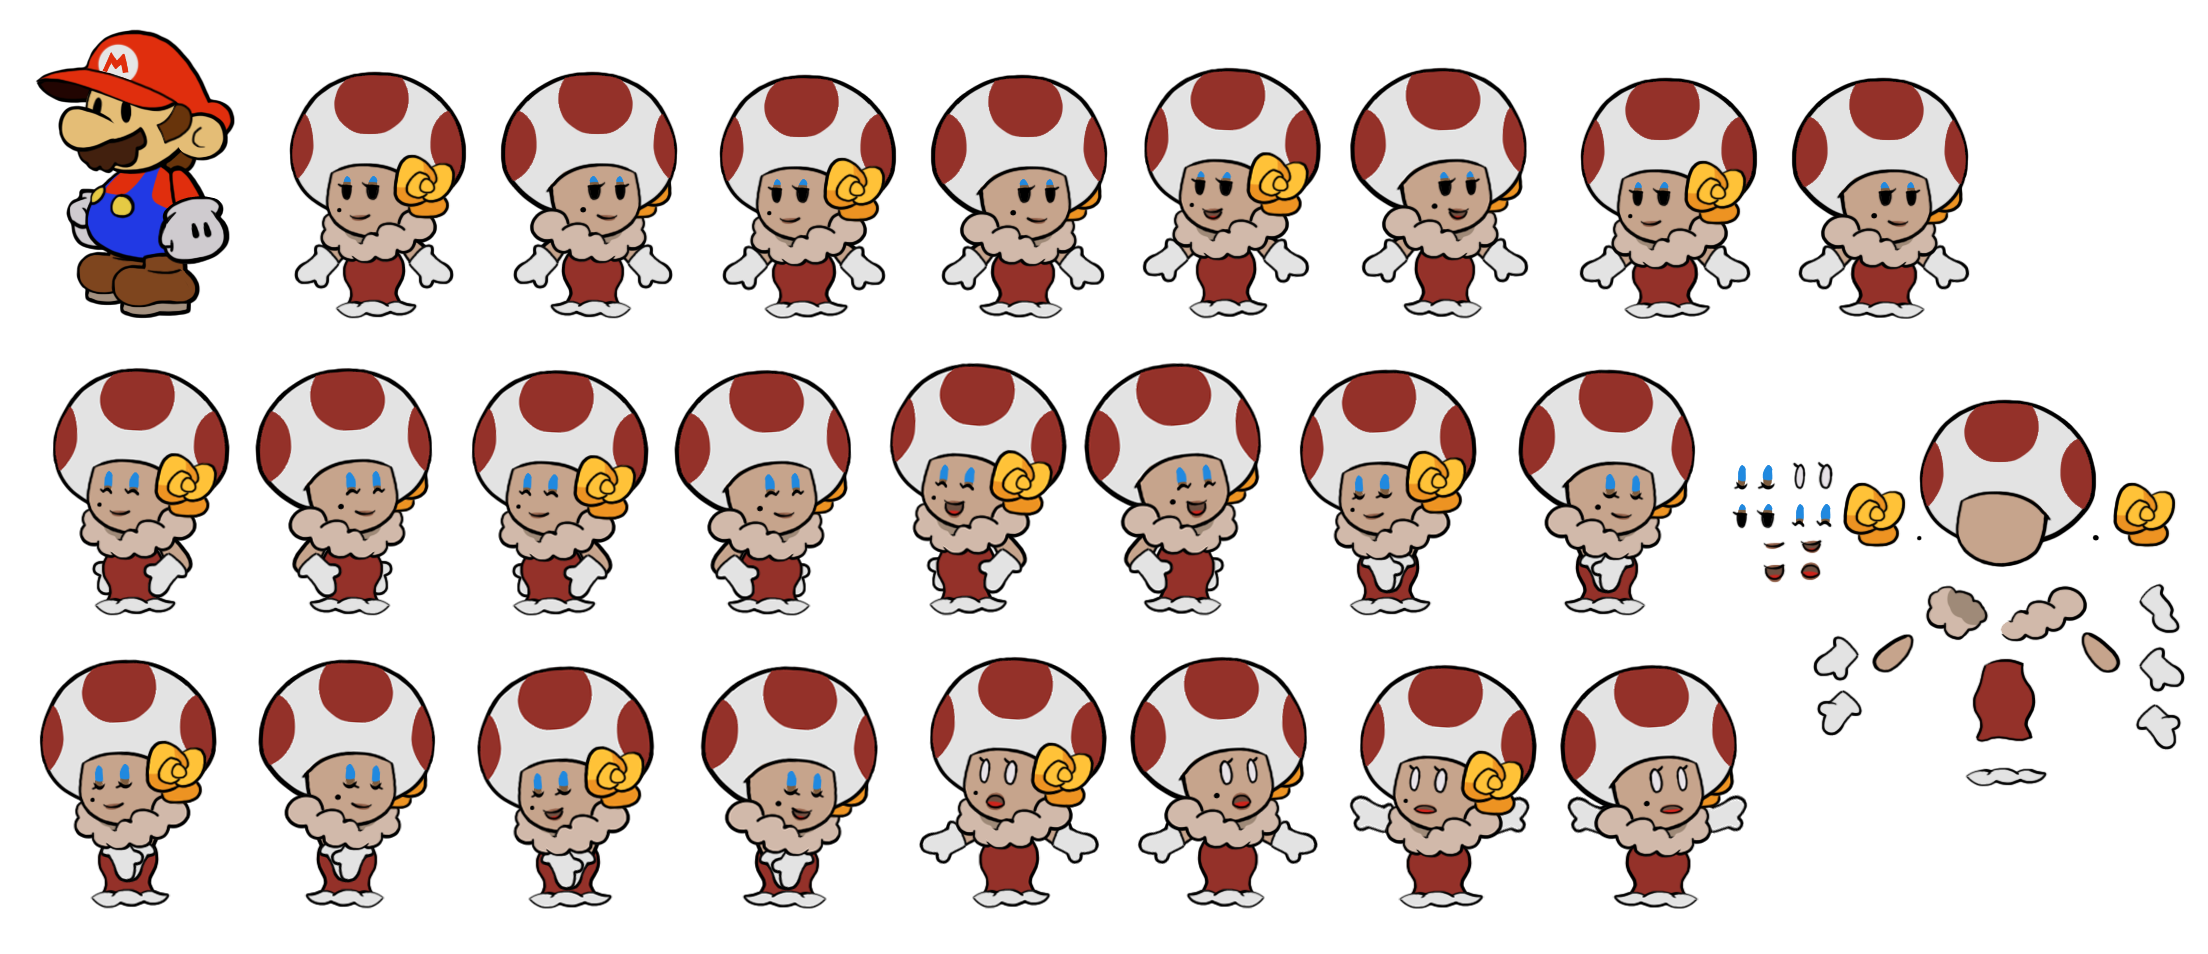 Toodles (Paper Mario-Style)